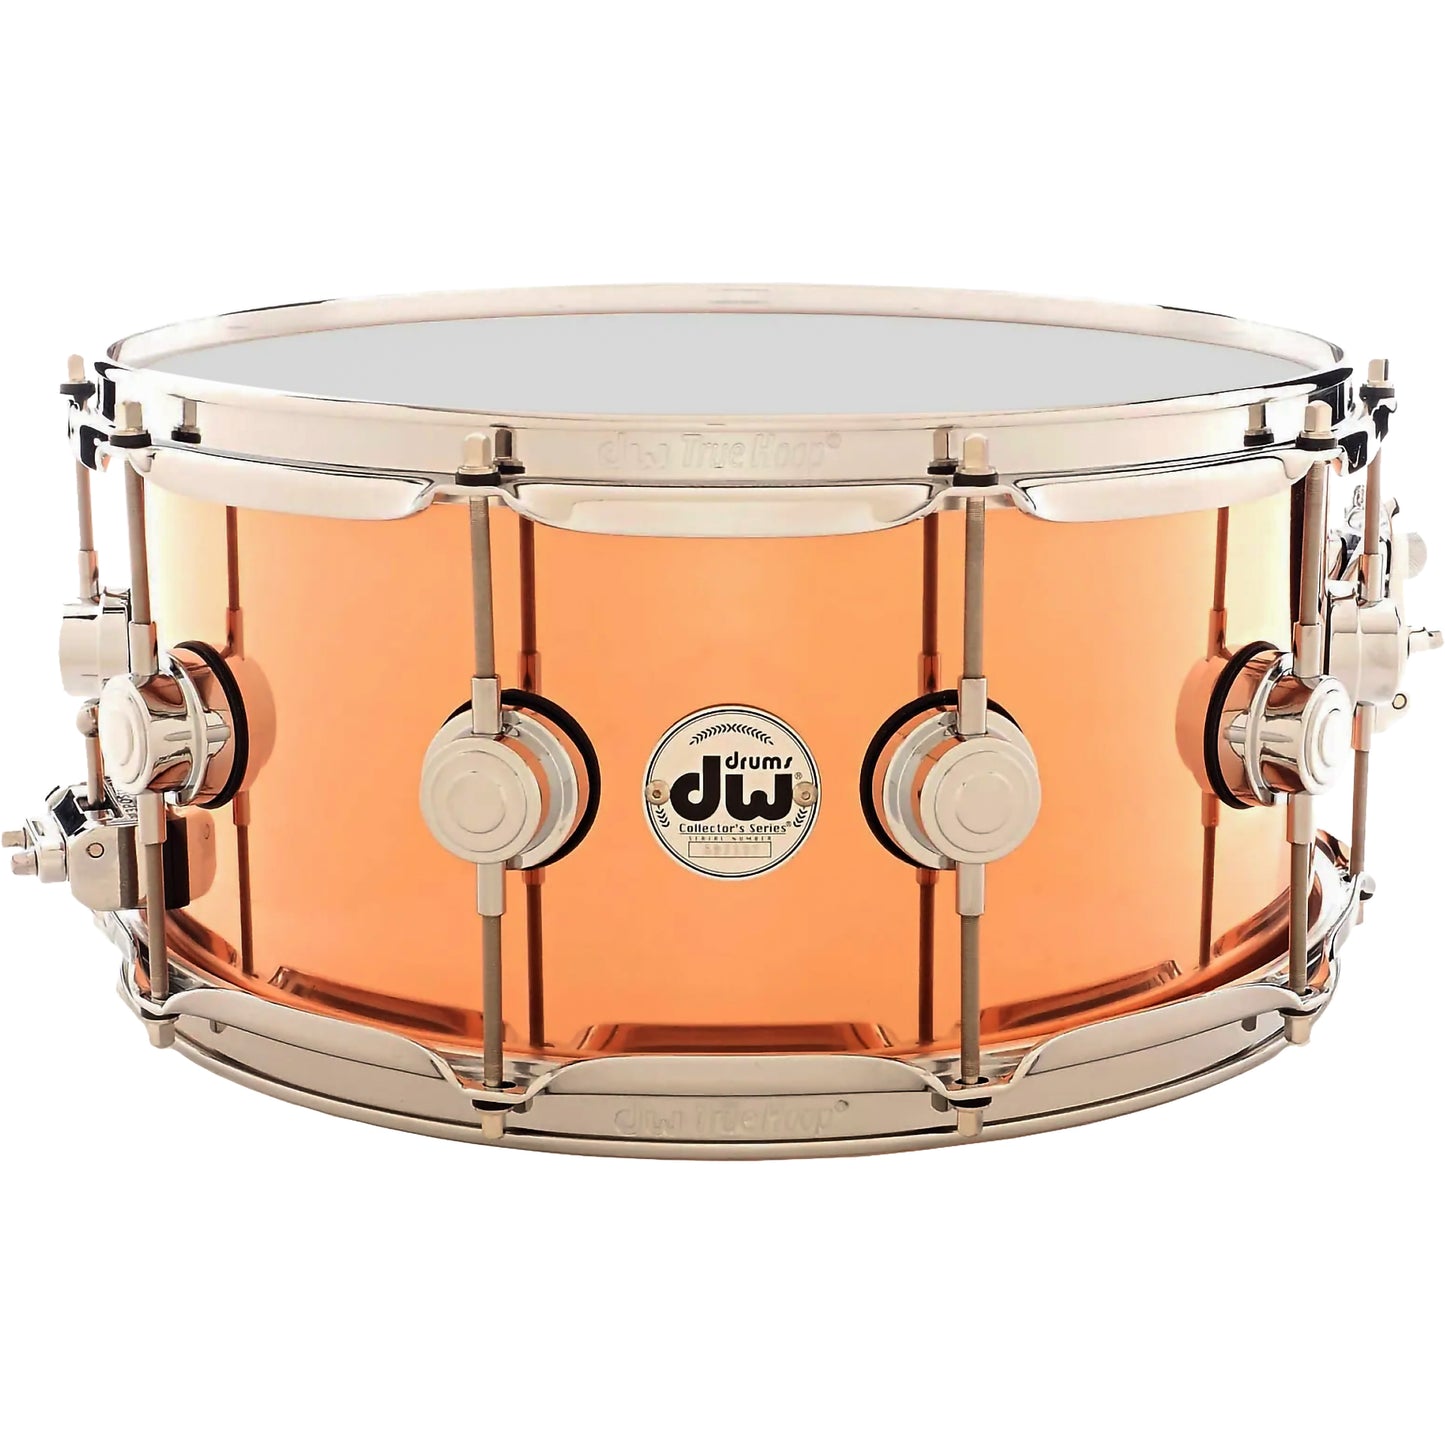 Drum Workshop Collector's Series 6.5 x 14 Polished Copper Snare Drum